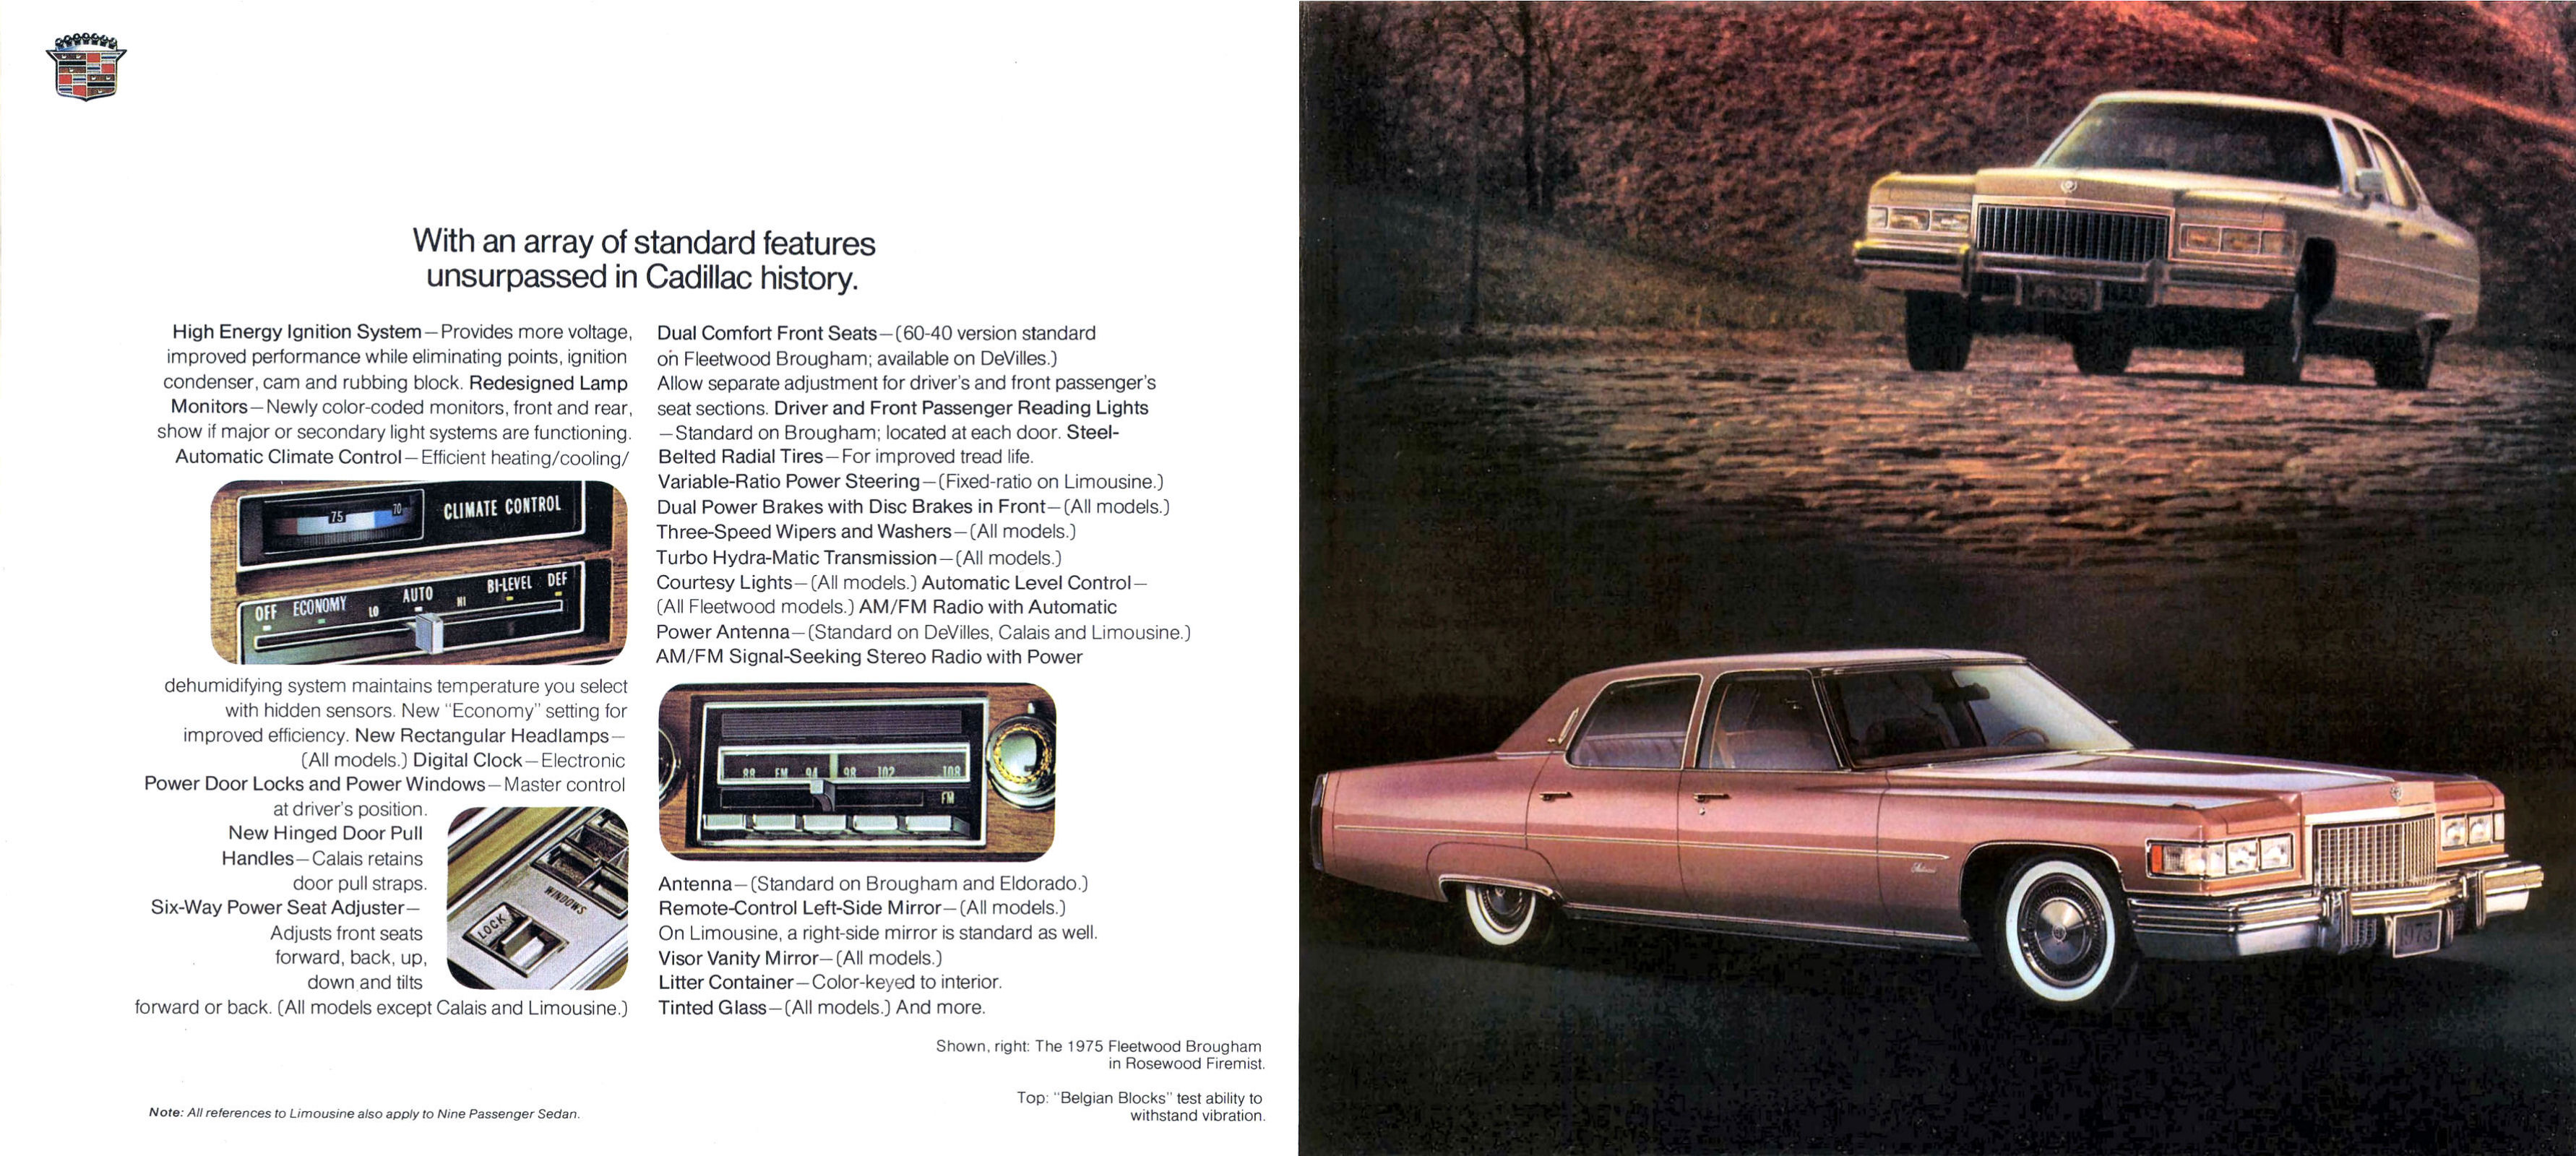 1975 Cadillac Then & Now Mailer-06-07